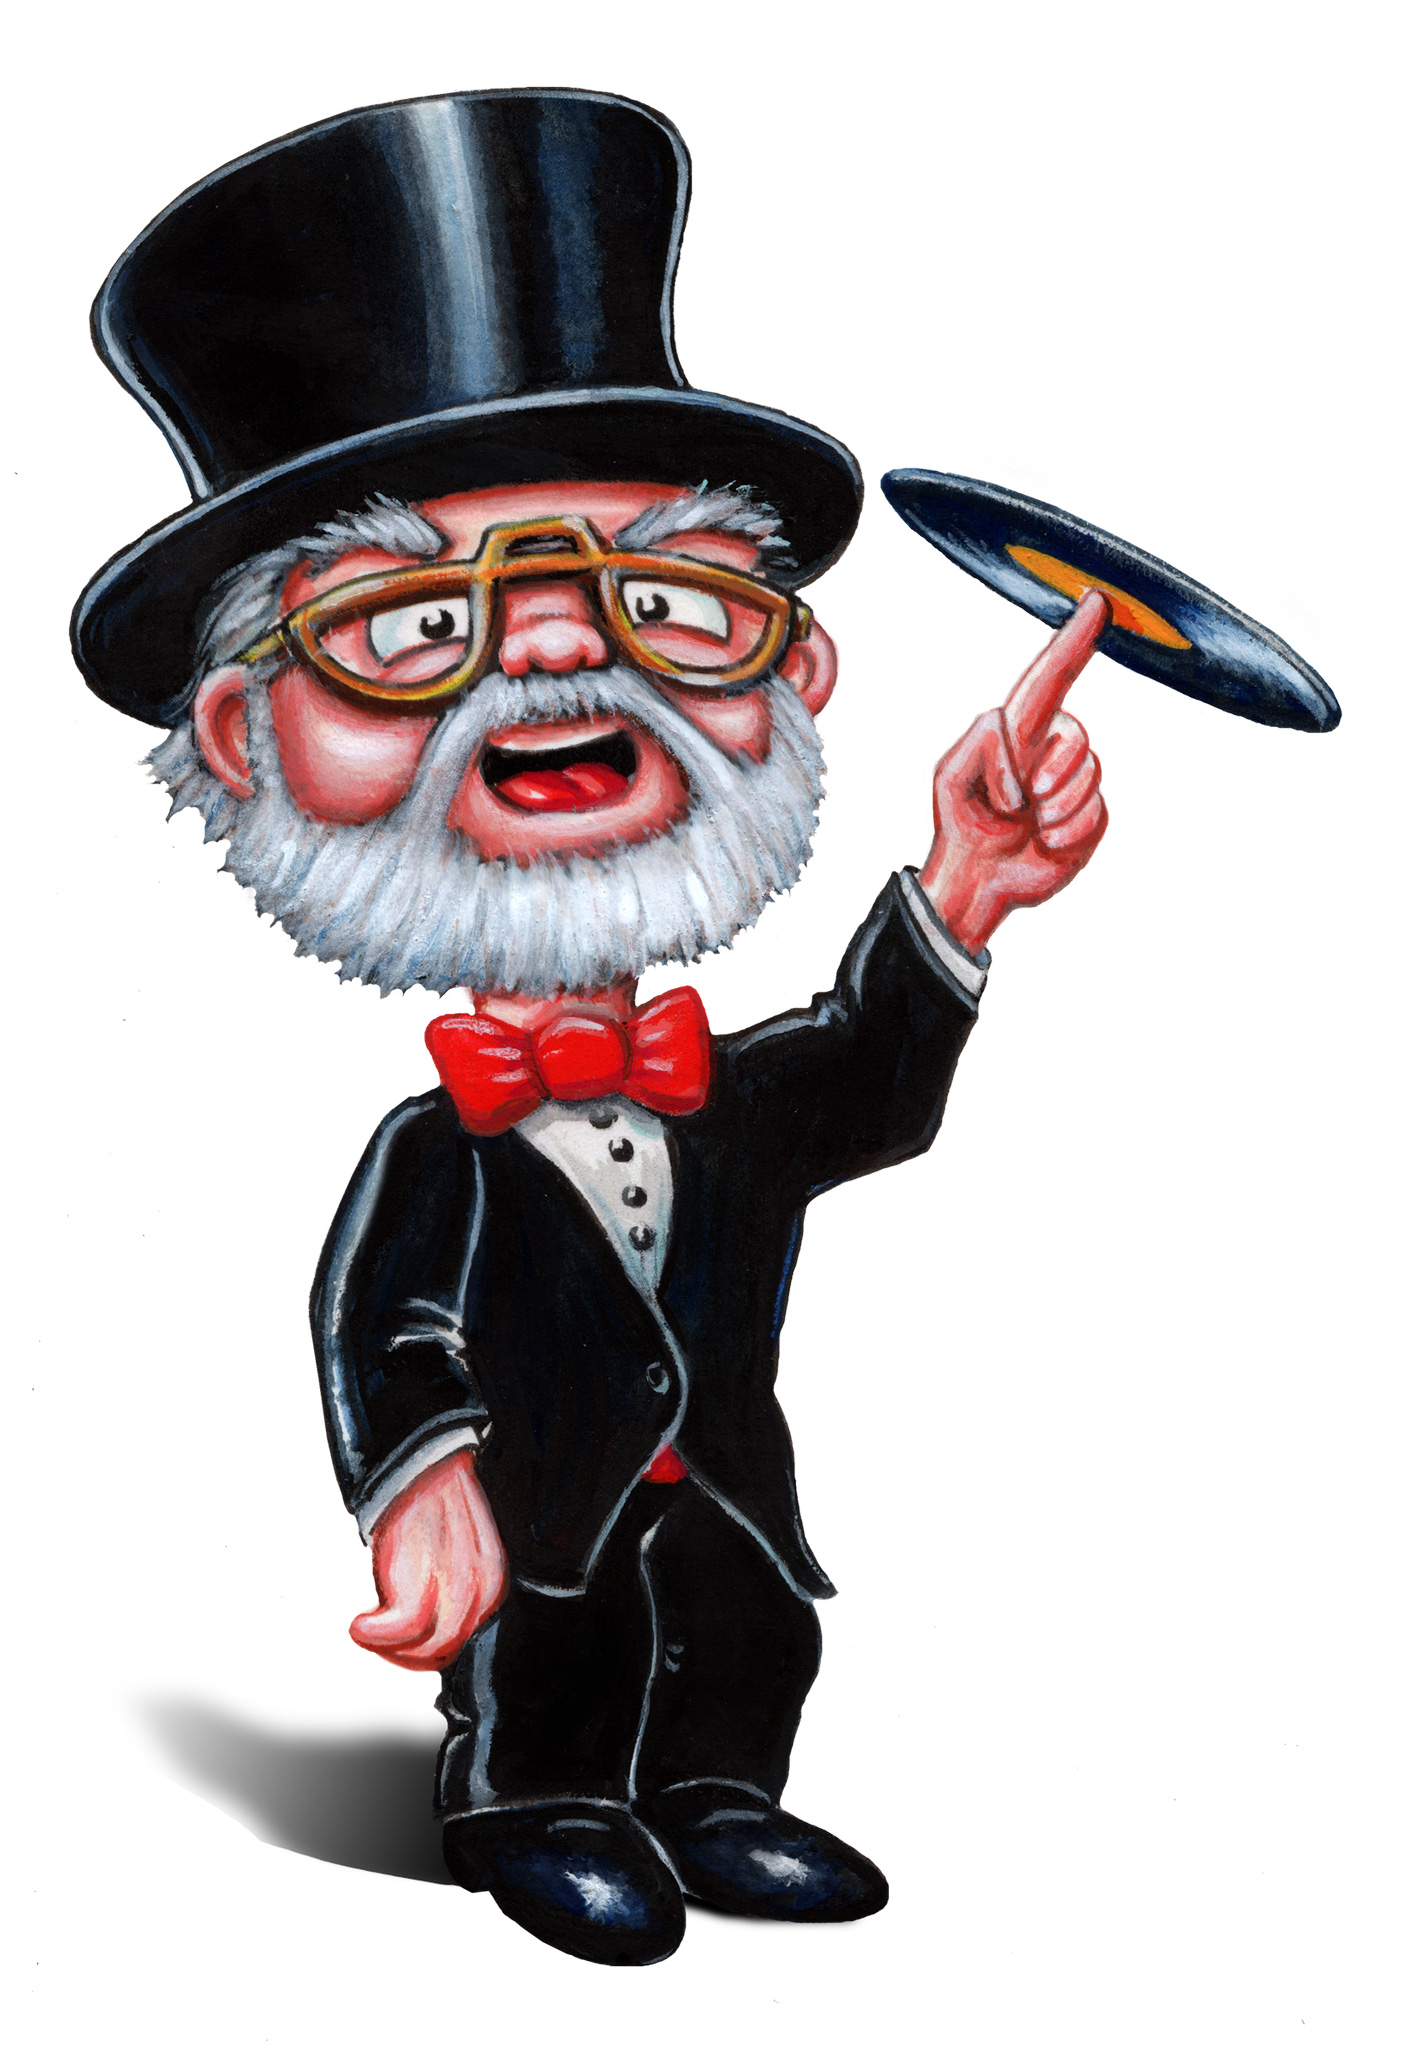 Dr. Demento Caricature  by Neil Camera. © 2018 Caf Muzeck, LLC. All Rights Reserved.